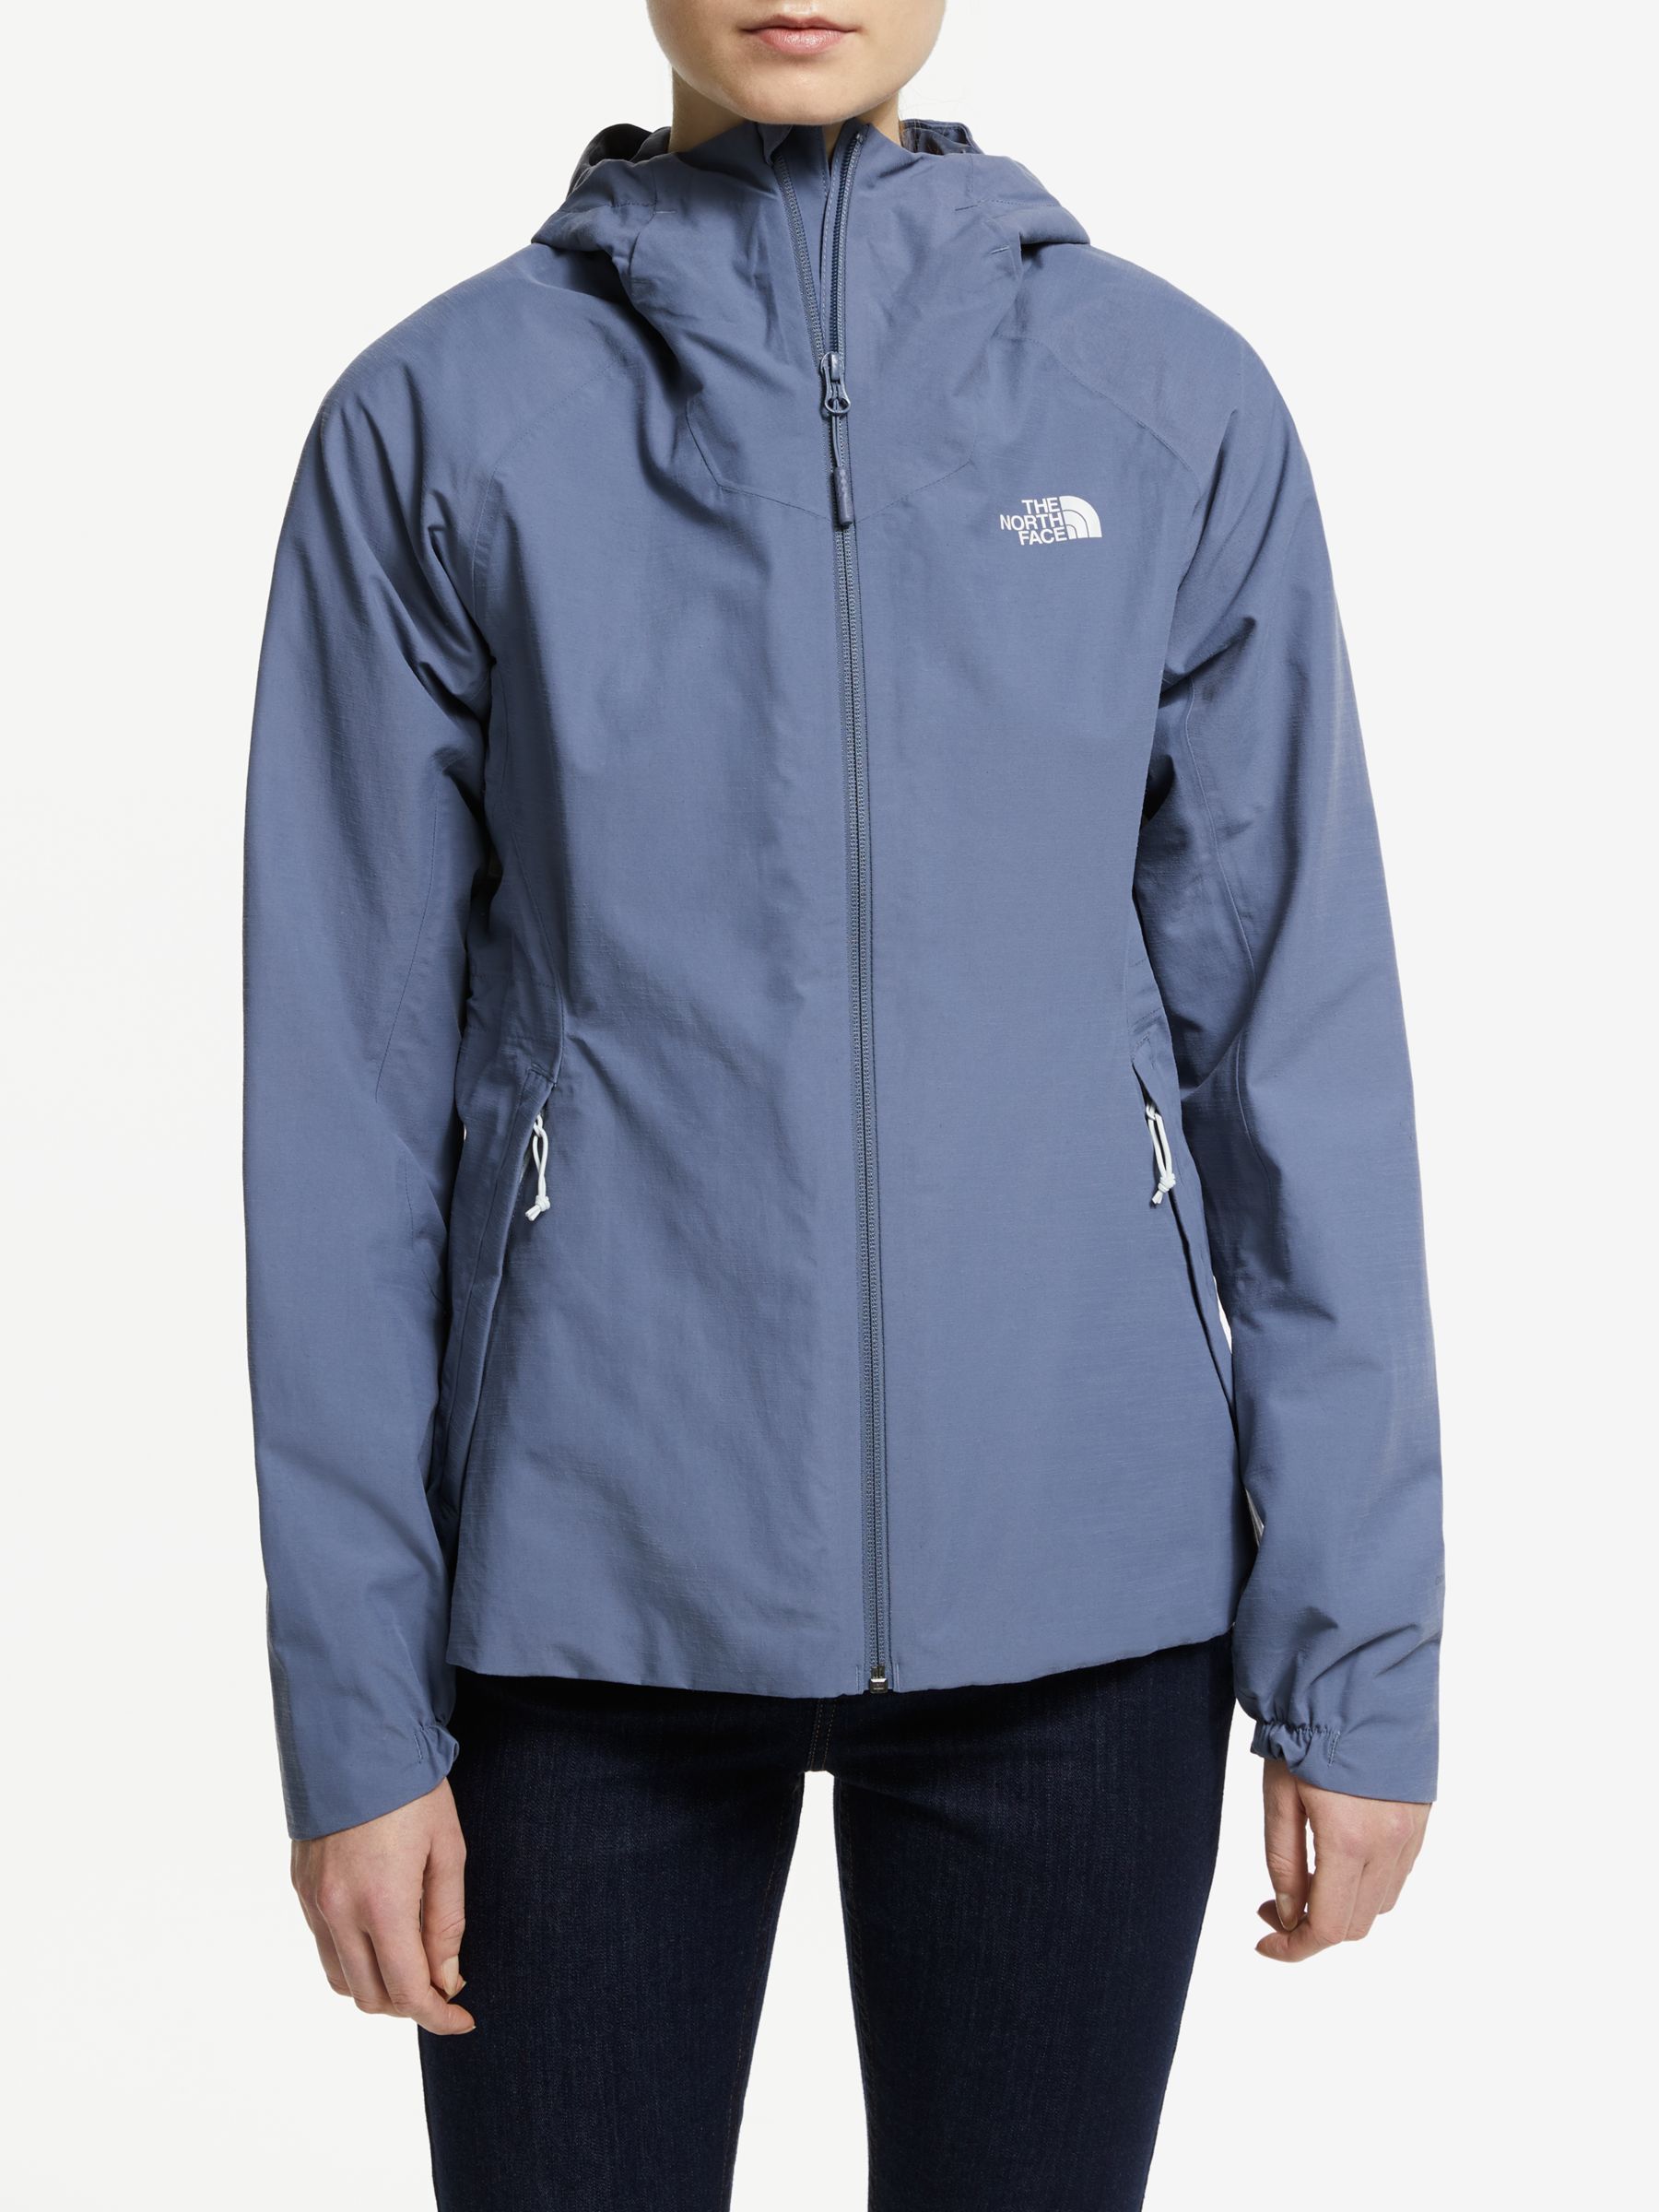 grisaille grey north face